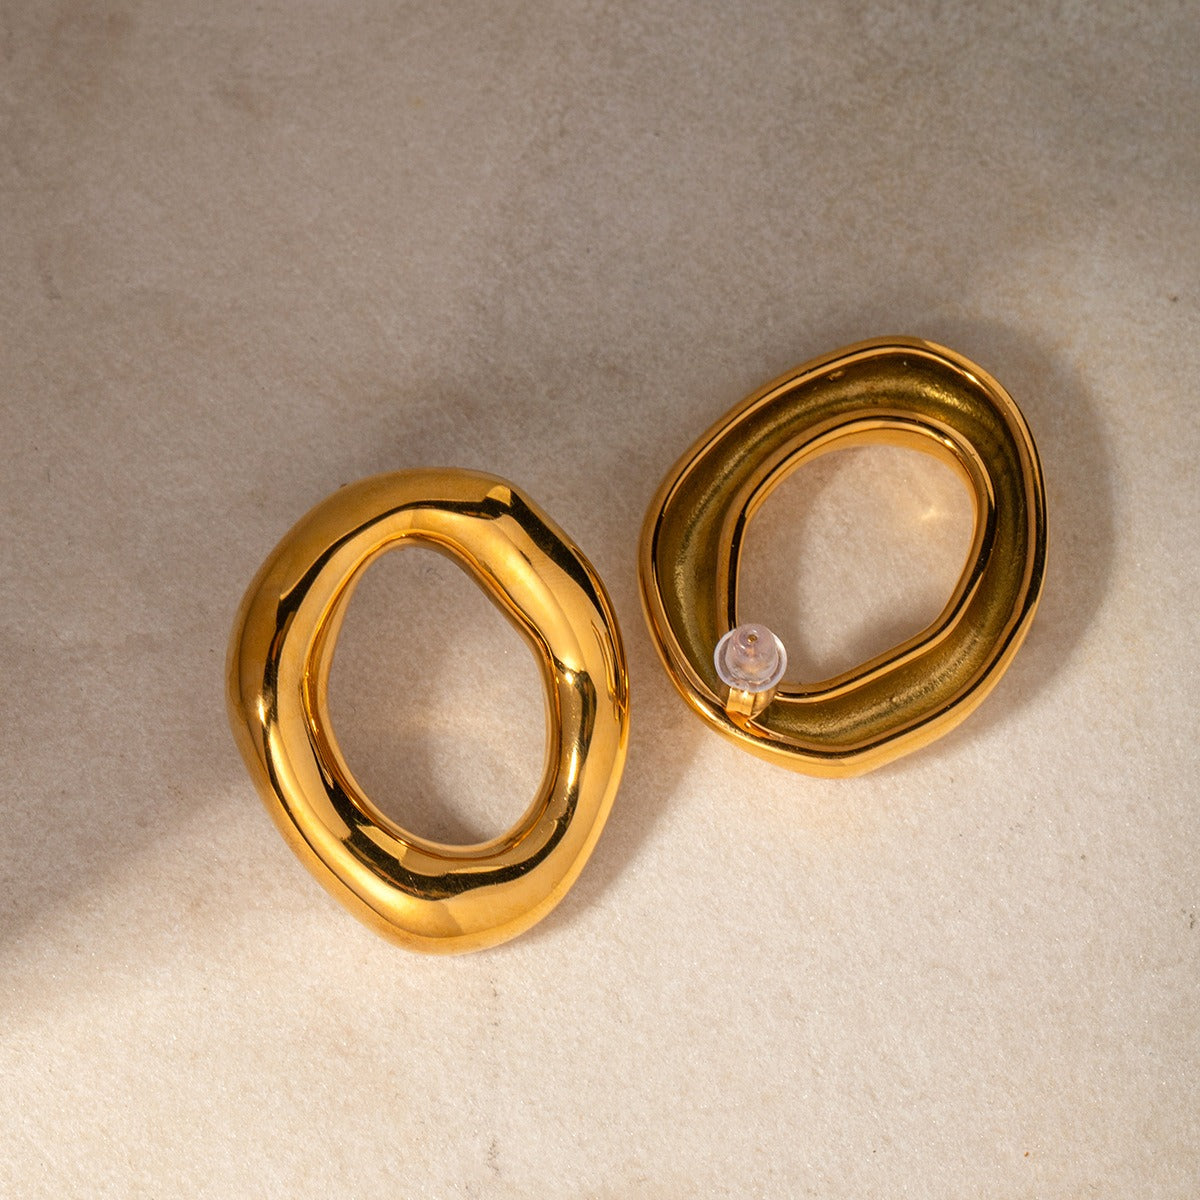 Gold simple and elegant oval hollow design versatile earrings